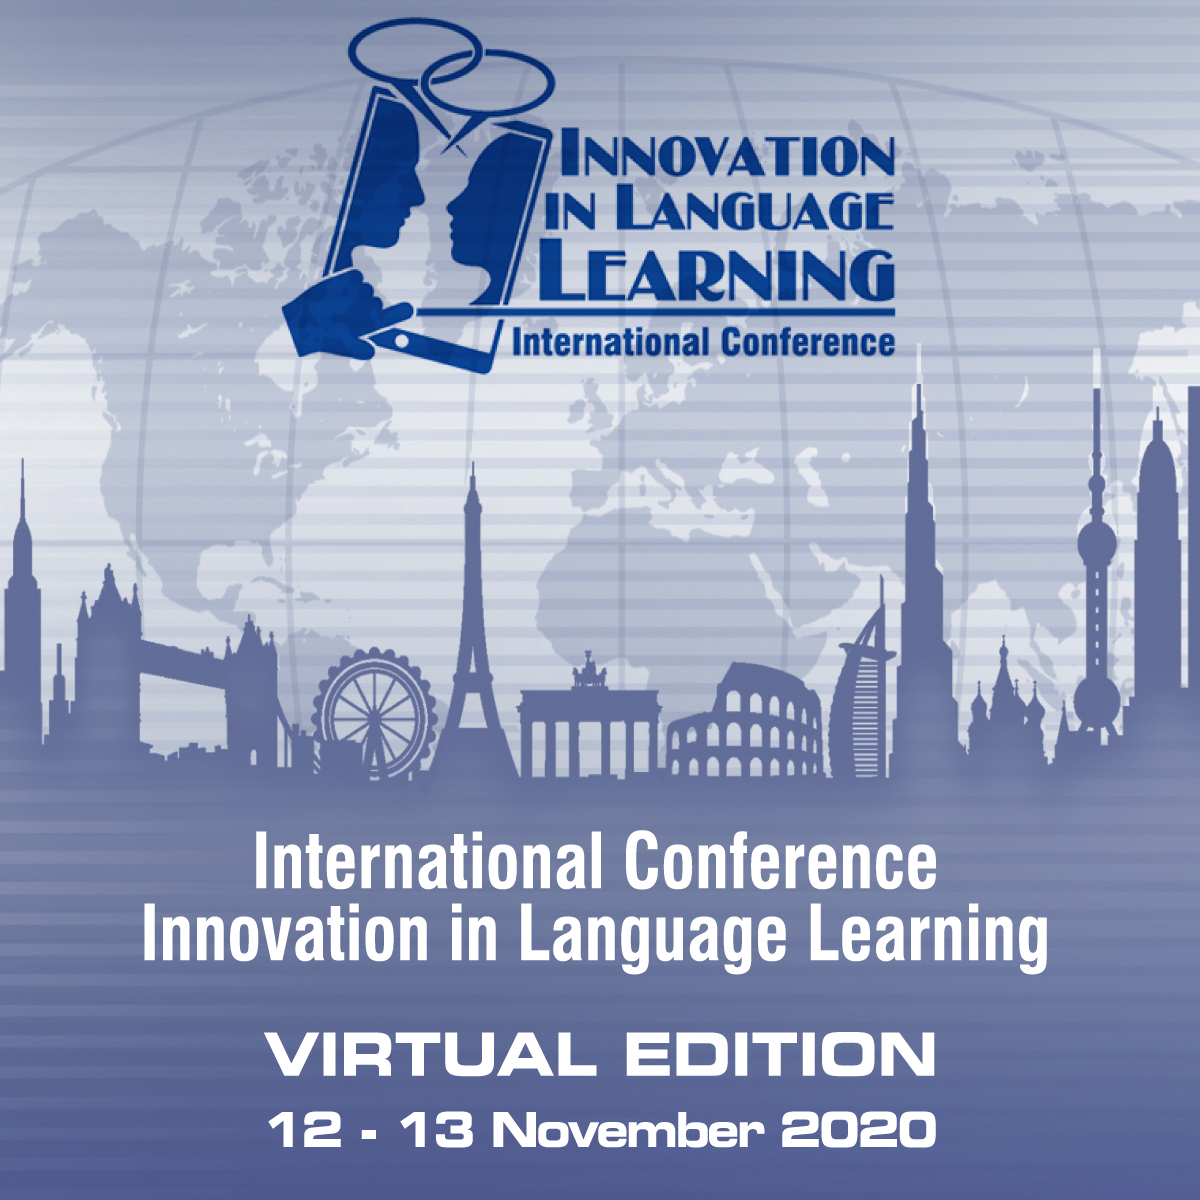 Innovation in Language Learning International Conference - Virtual Edition